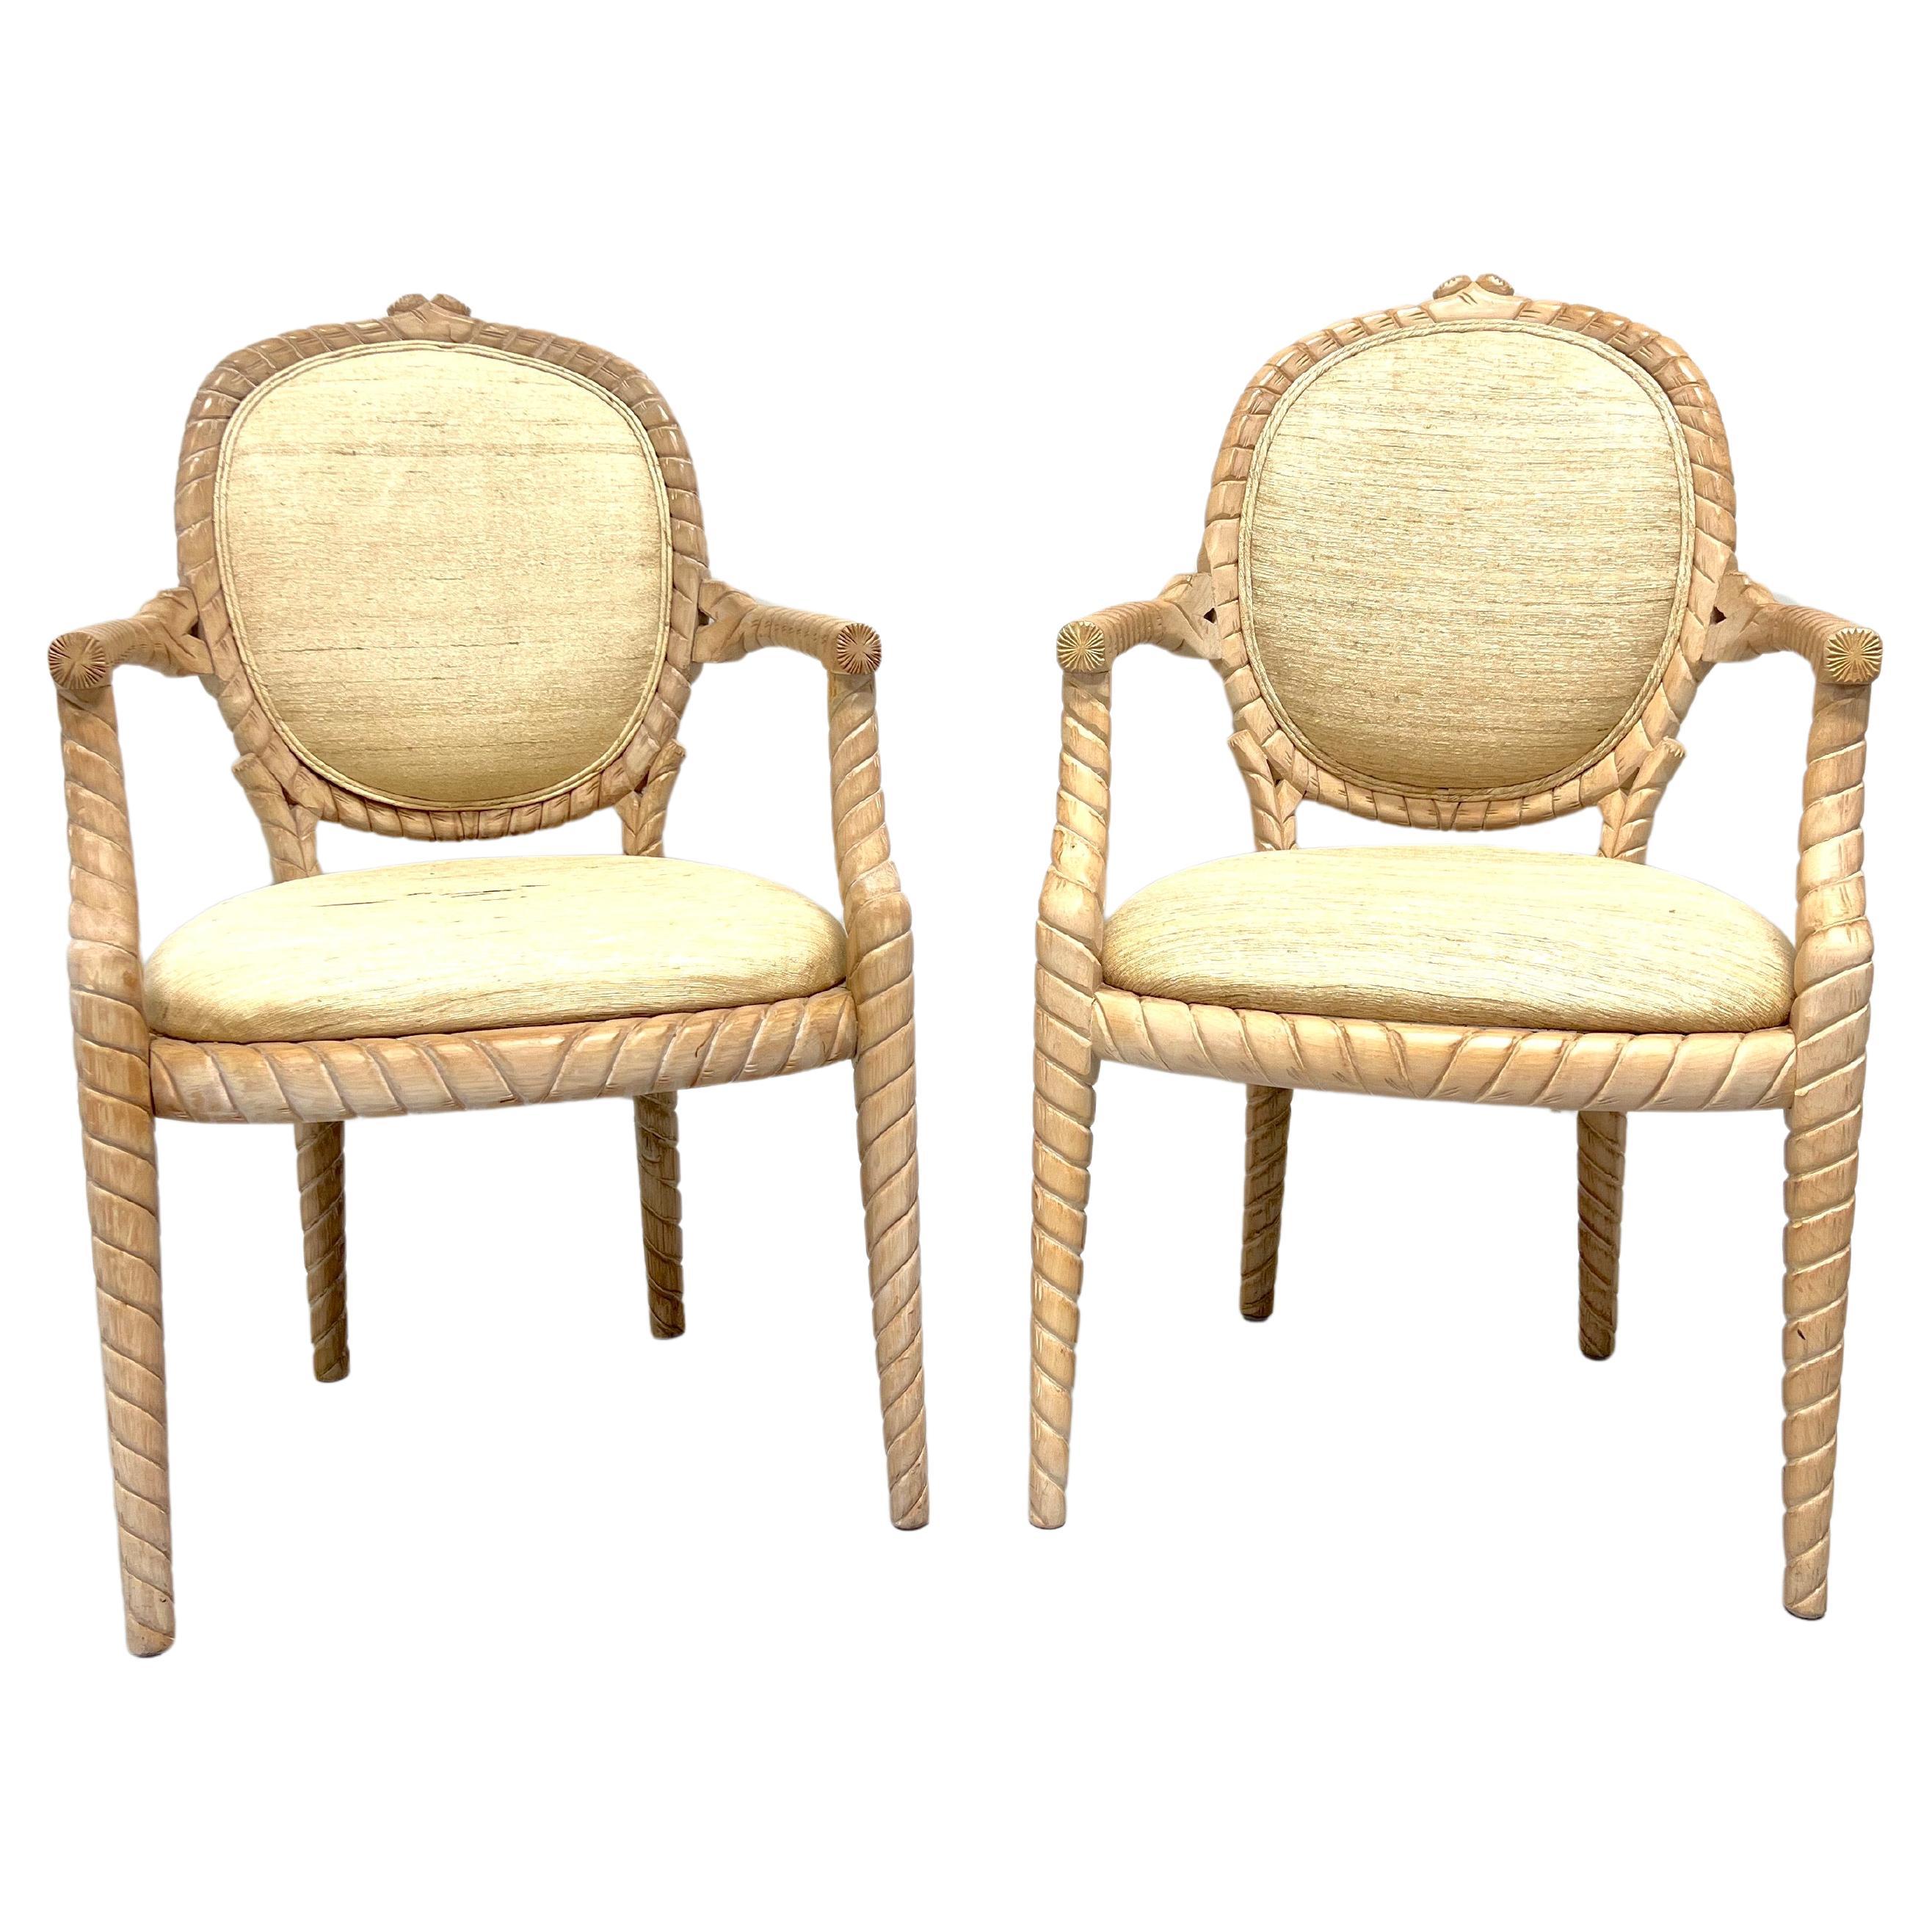 1980's Carved Whitewashed Wood Boho Rope Twist Dining Armchairs - Pair For Sale